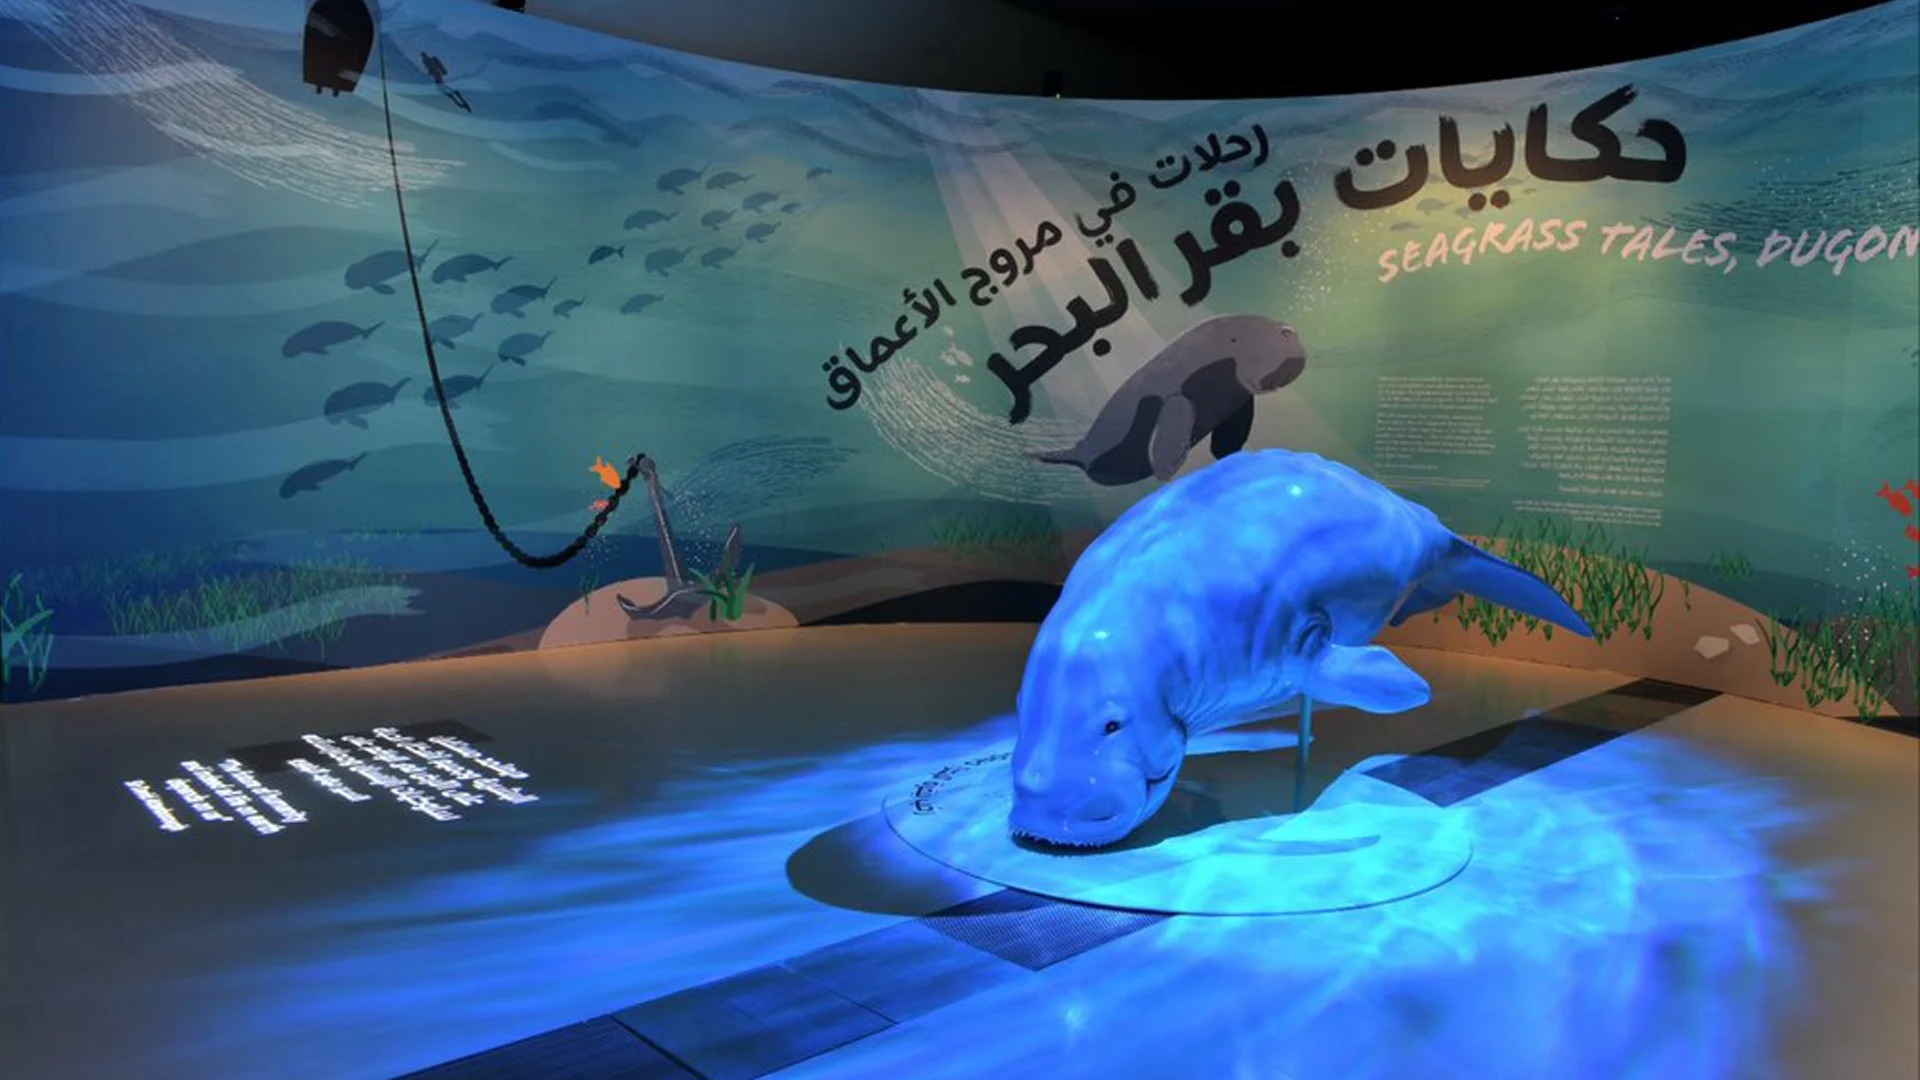 NMoQ Presents First Natural History Exhibition on Dugong